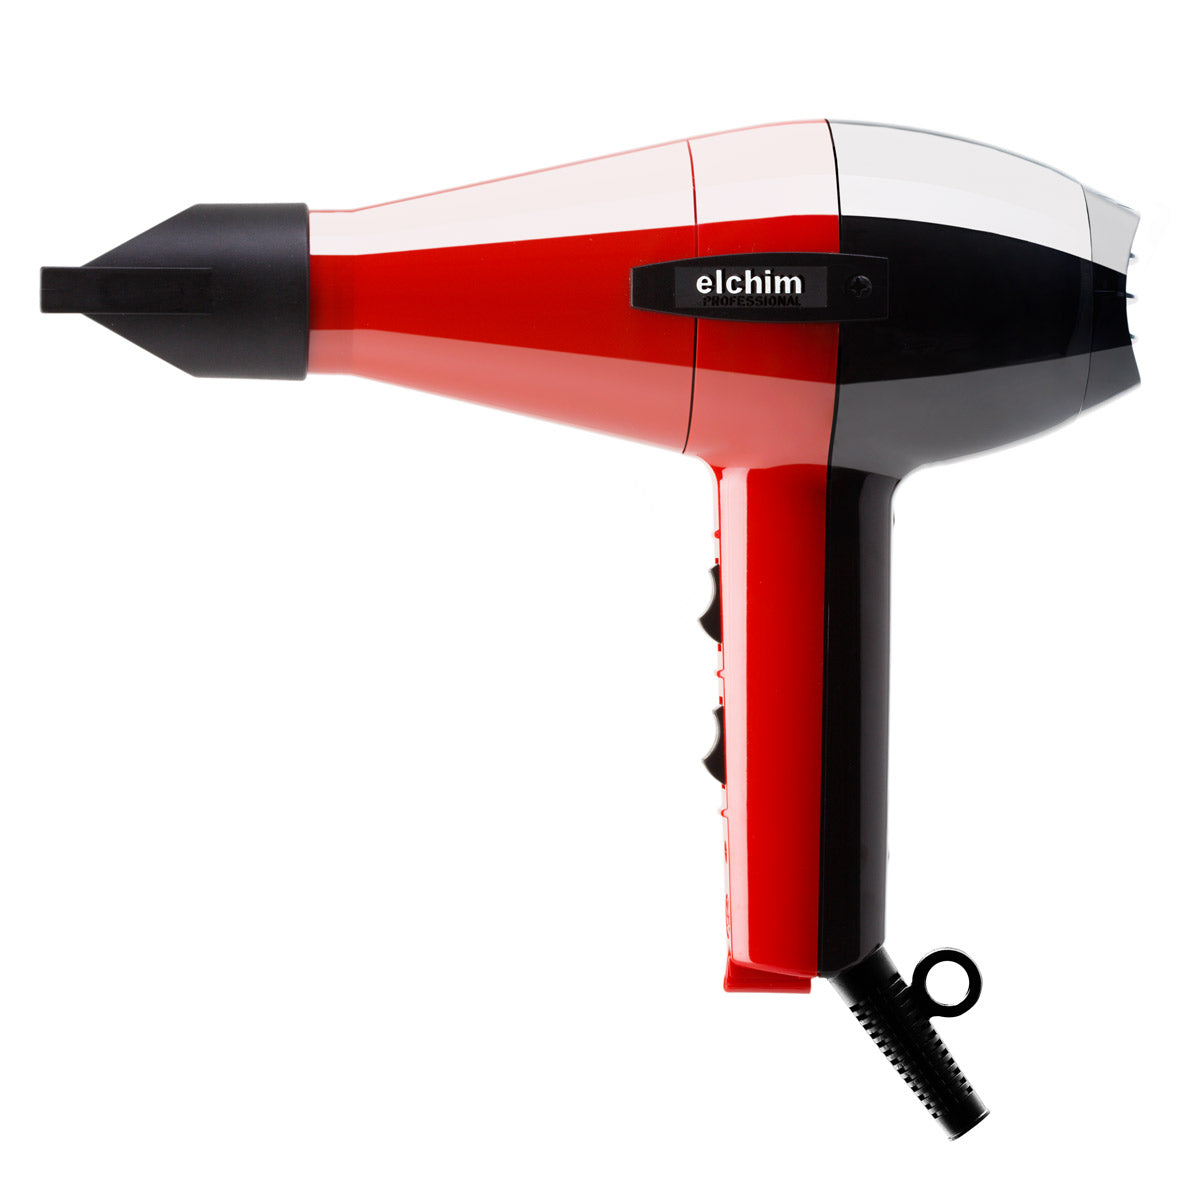 ELCHIM 2001 HP Hair Dryer (Red & Black) - Creata Beauty - Professional Beauty Products